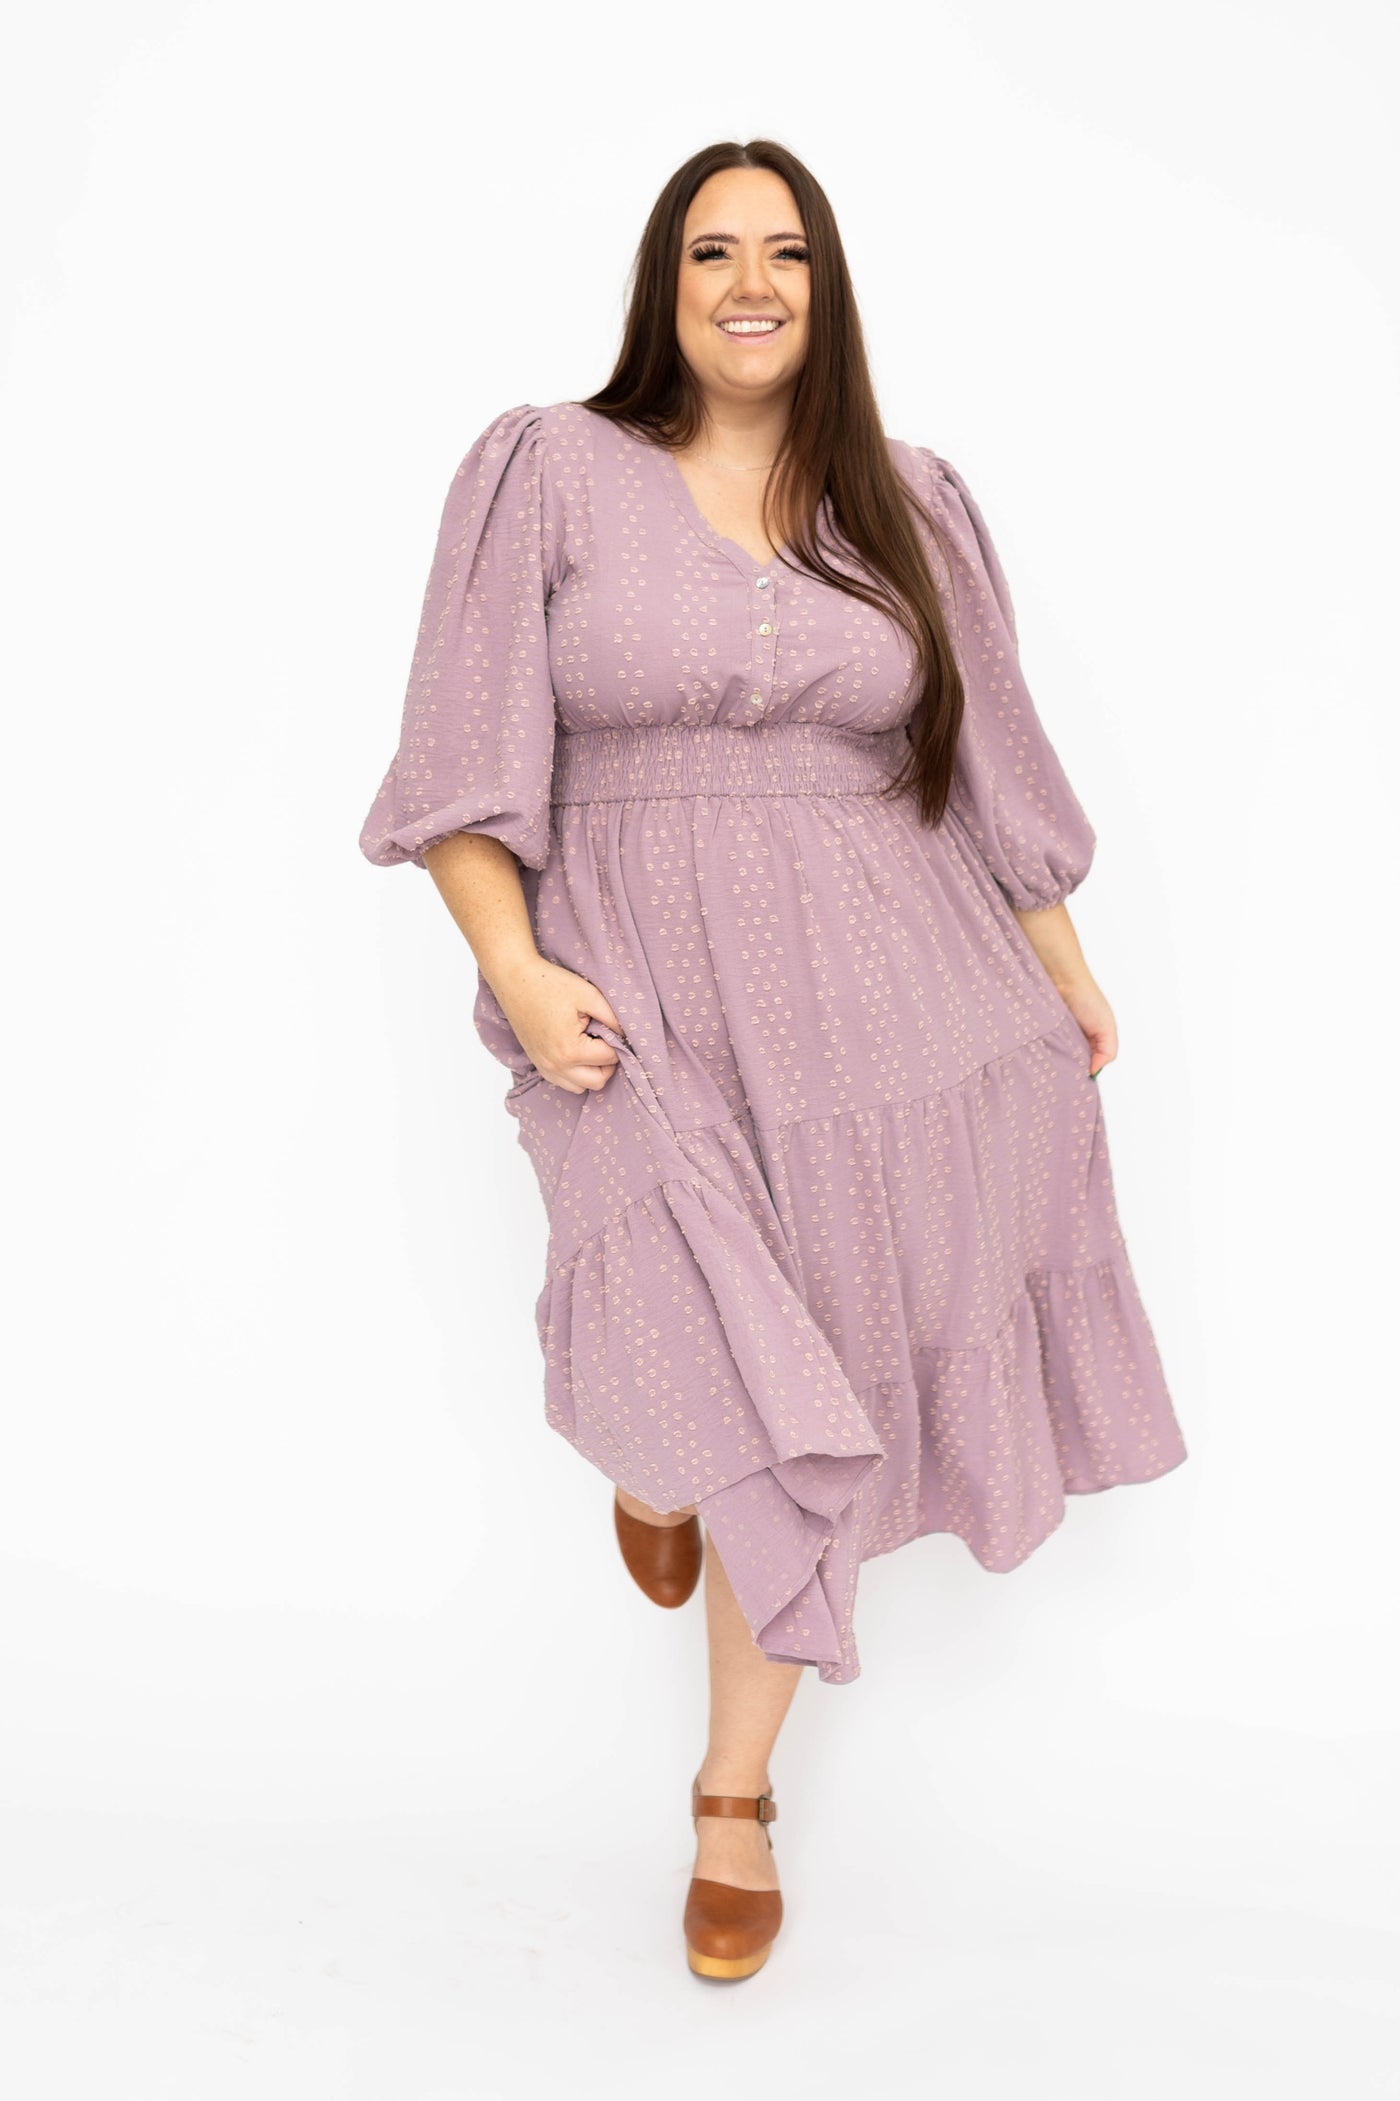 Plus size lavender dress with tiered skirt and 3/4 sleeve